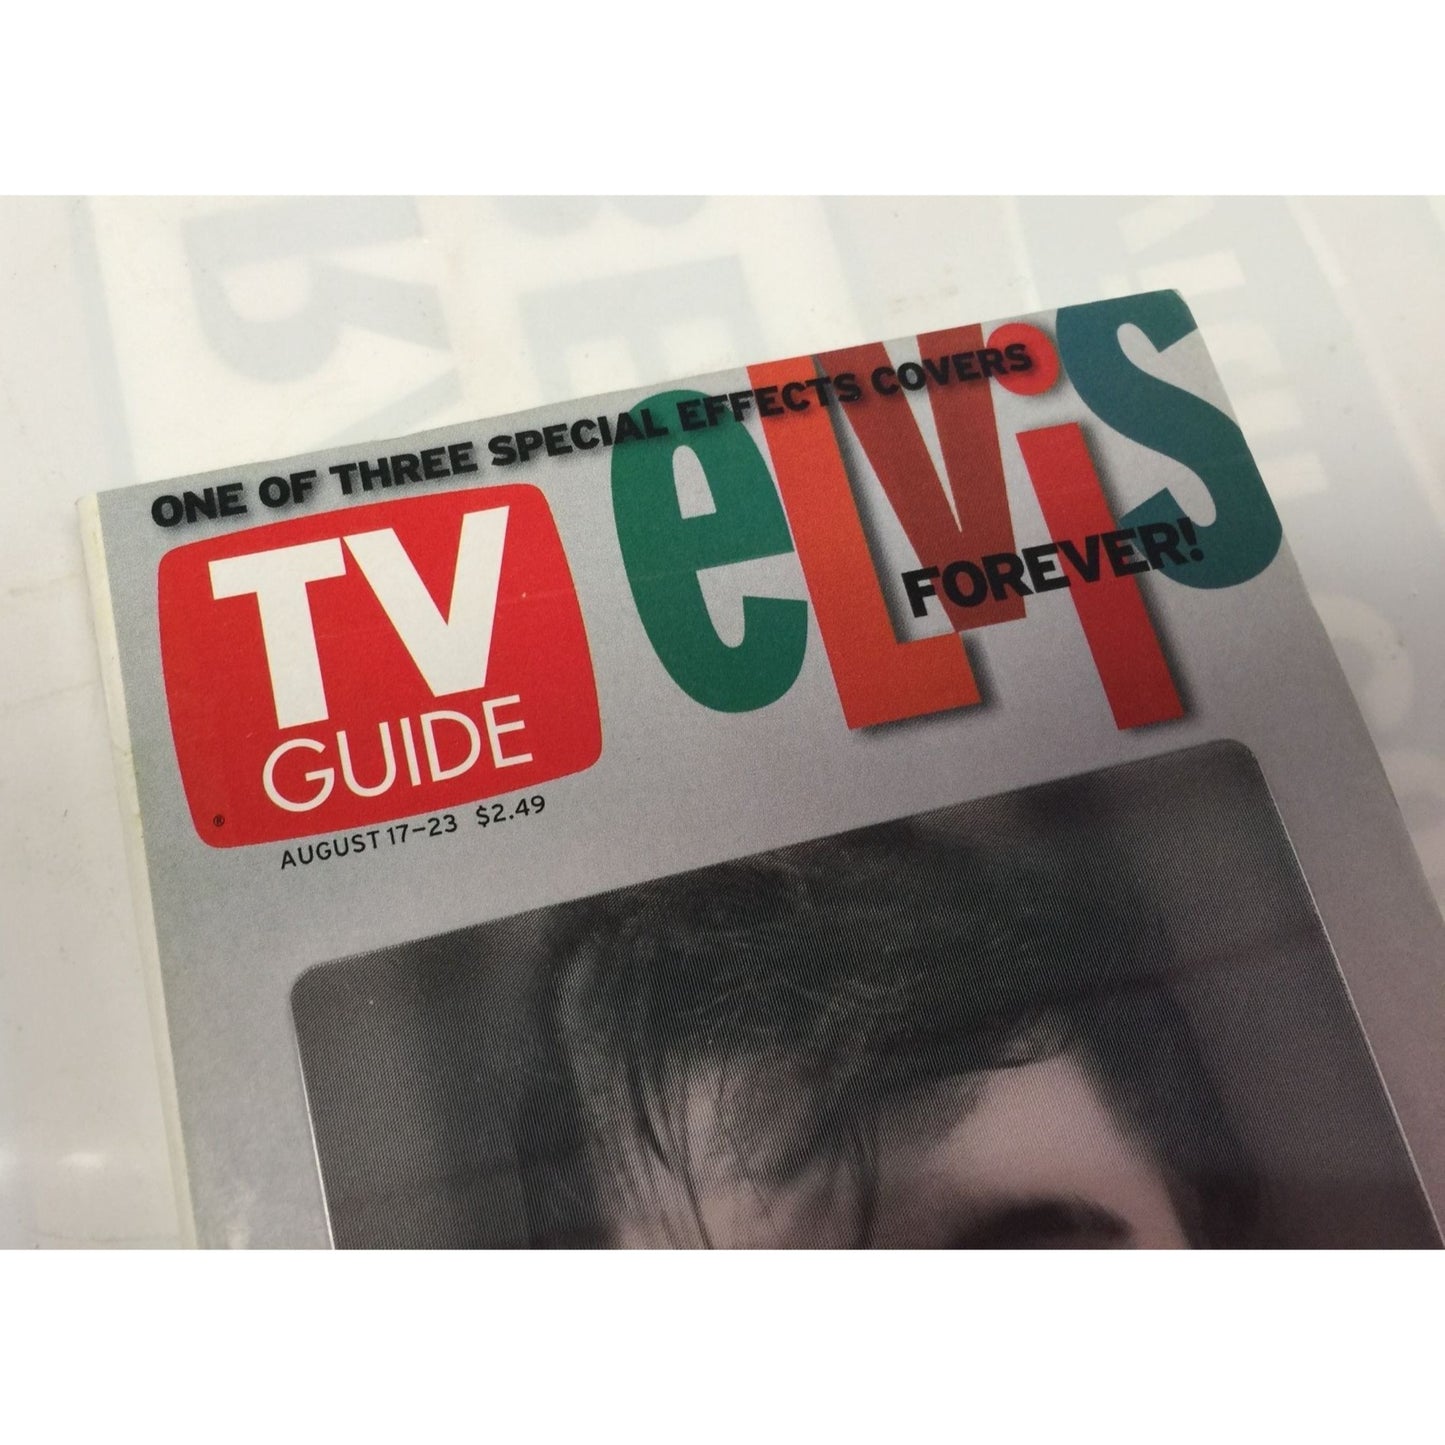 Vintage Aug. 17-23, 2002 Collectible ELVIS TV GUIDE Book